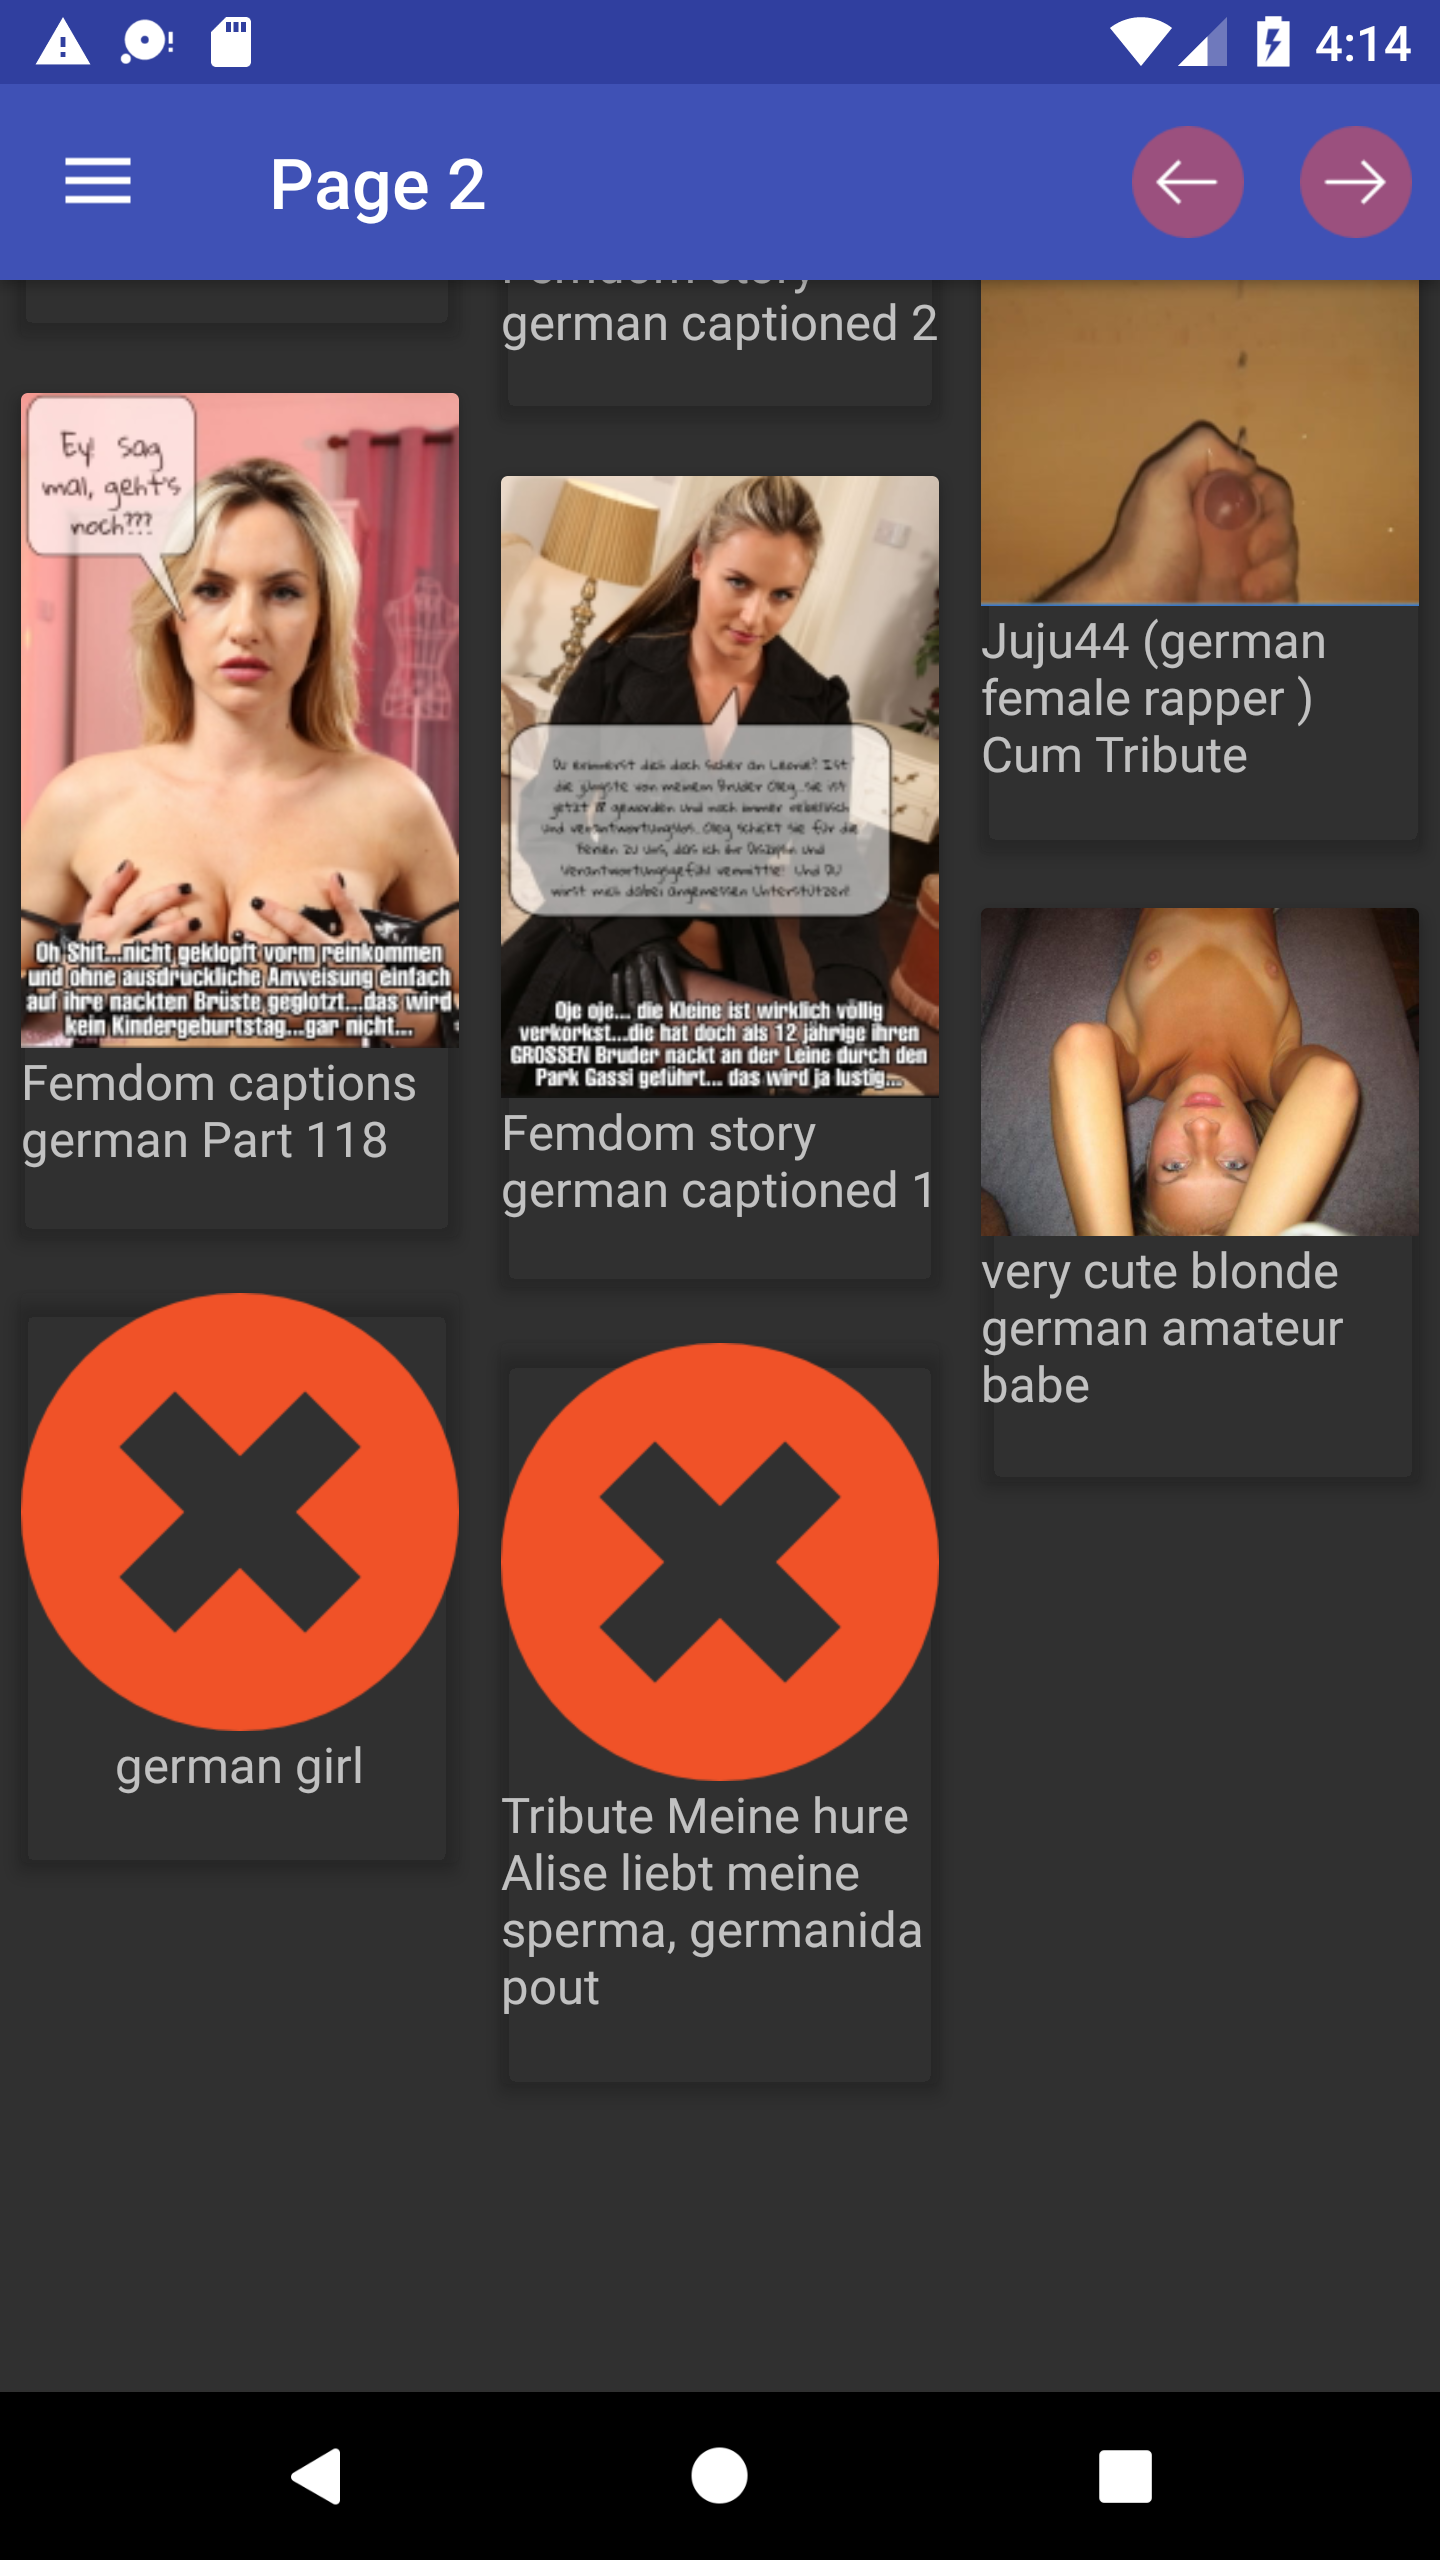 German Porn galleries,sexy,pics,photo,wallpapers,hemtai,apk,porn,gallery,hentai,alexis,pictures,app,apps,download,texas,hot,pornstars,packs,erotic,picture,collection,hetai